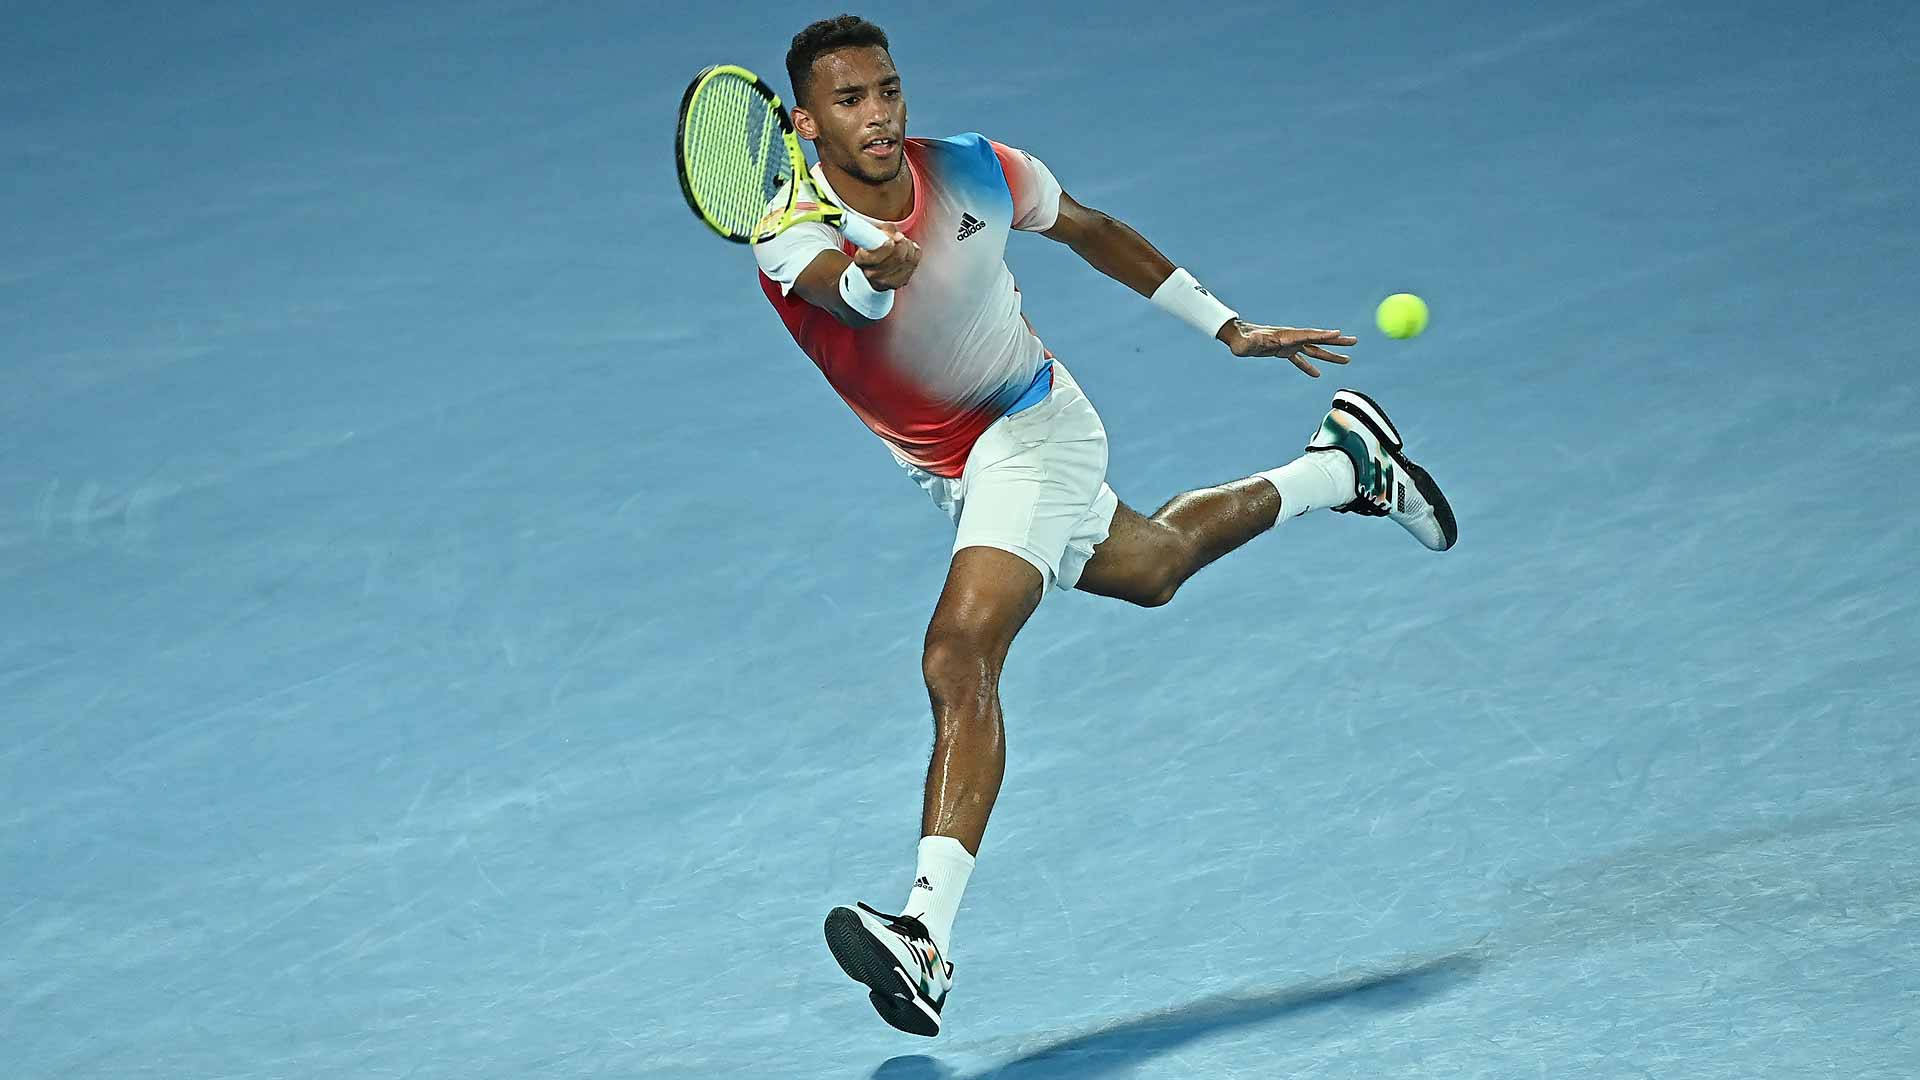 Tennis Prodigy Felix Auger Aliassime in Action Wallpaper